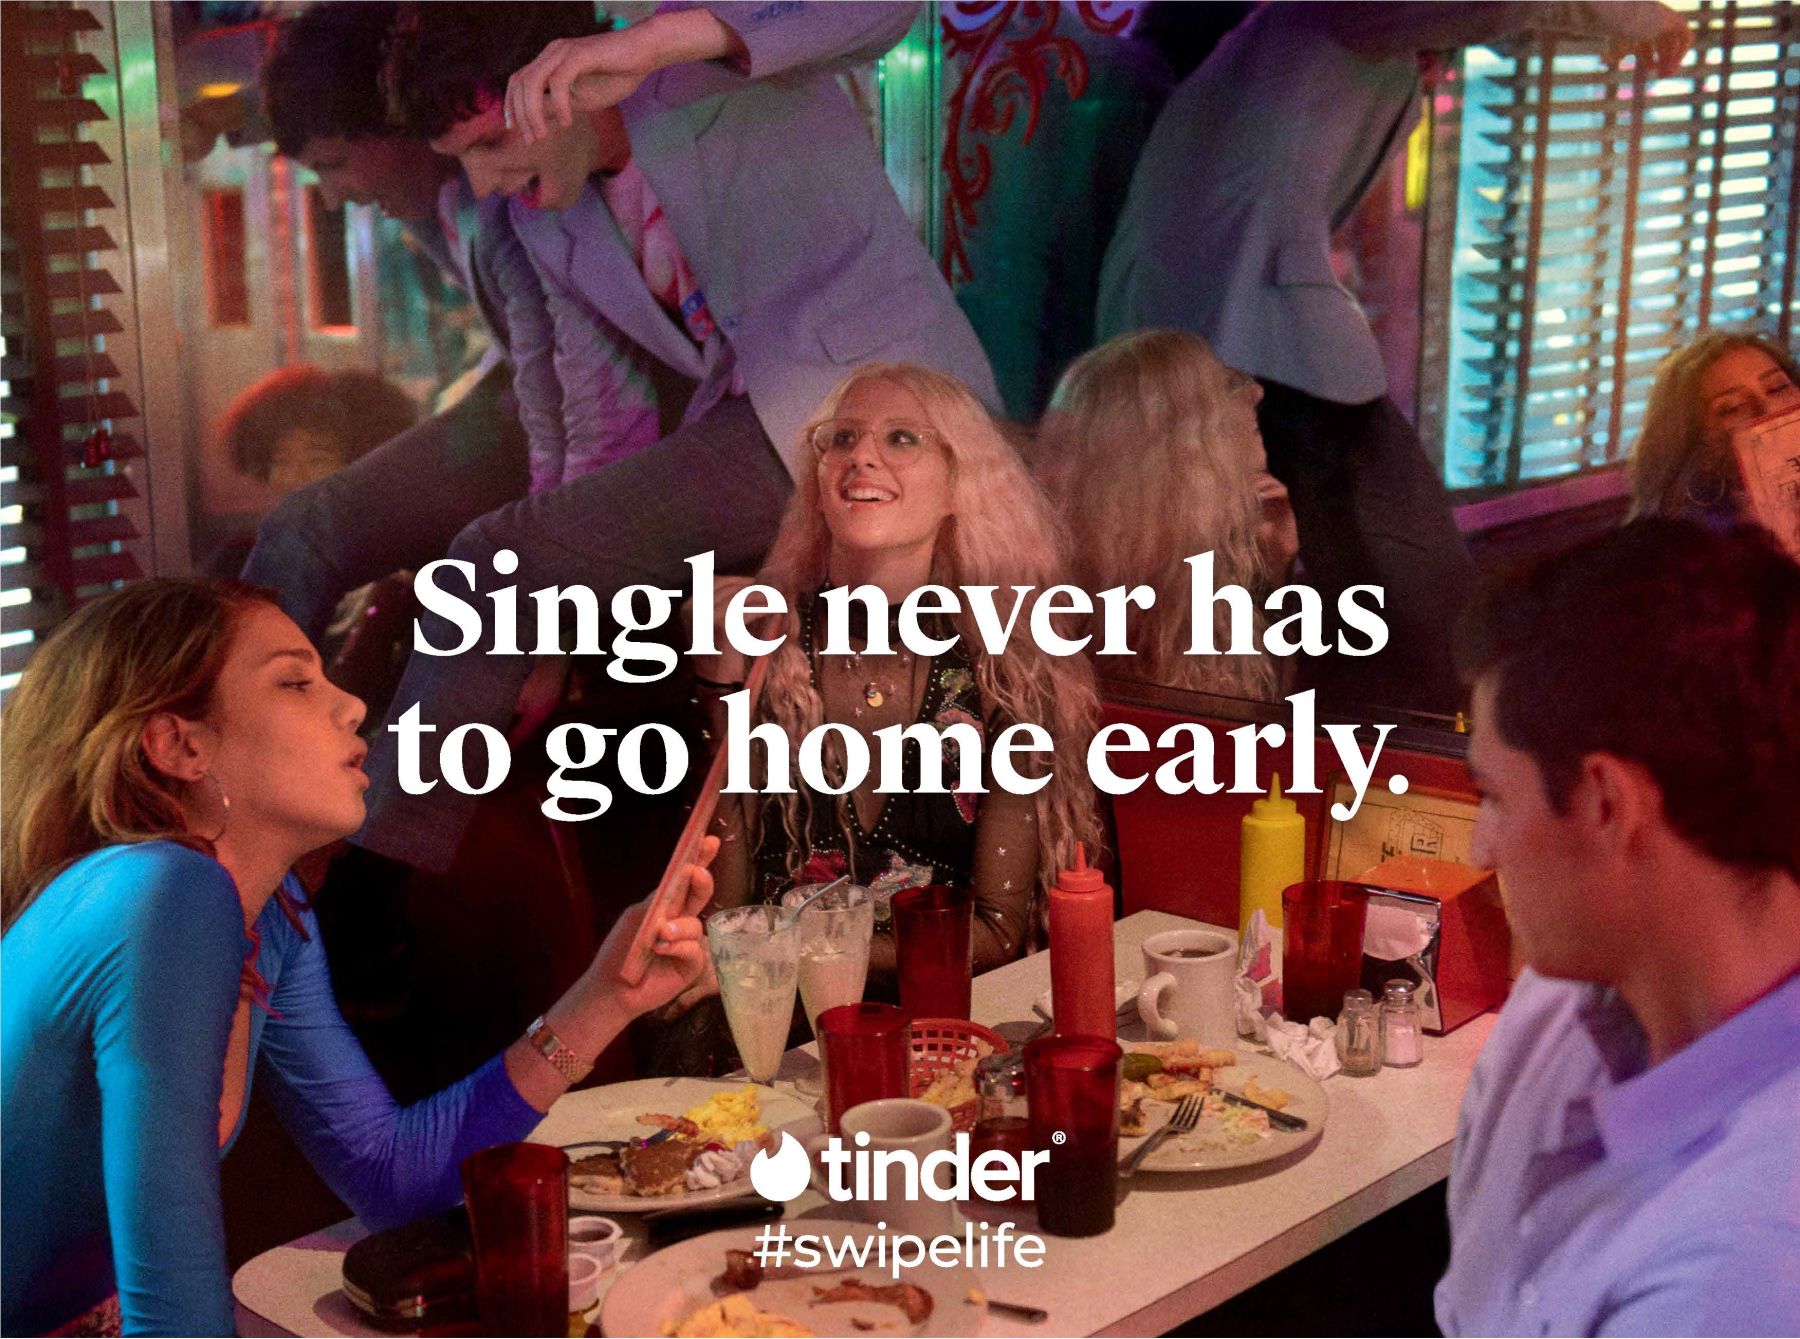 Tinder Single Never Has to Go Home Early